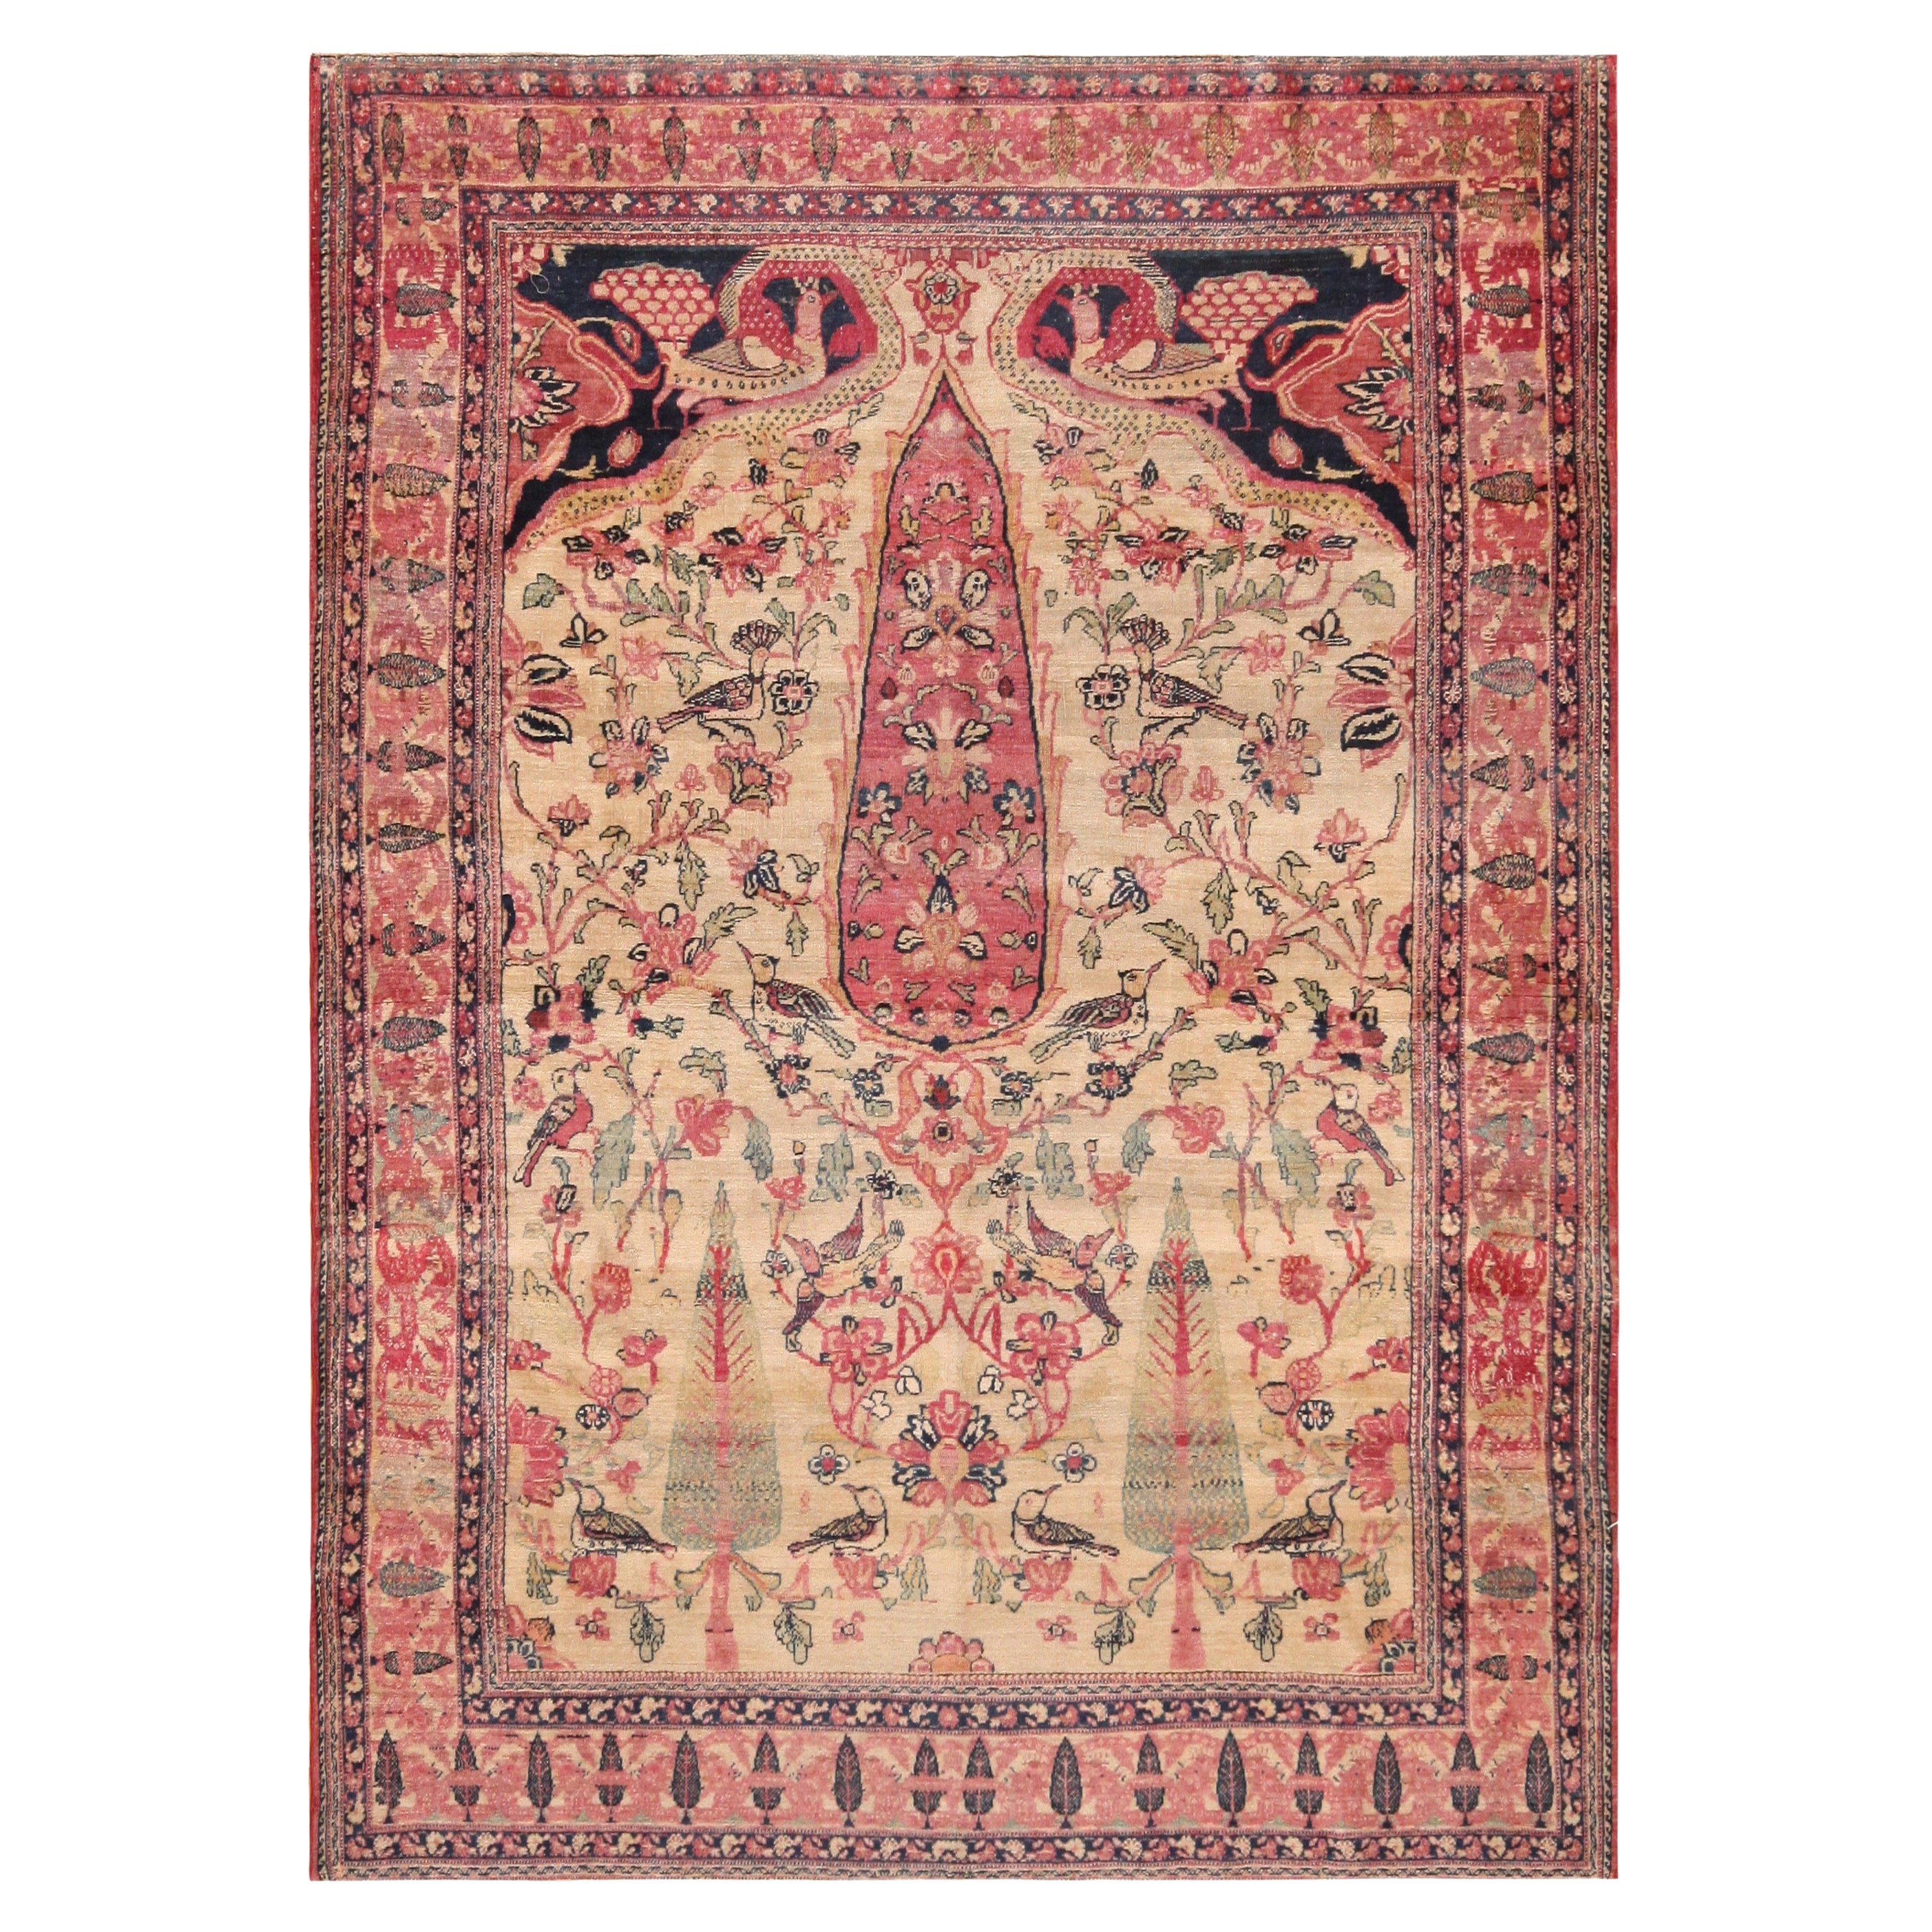 Nazmiyal Collection Antique Persian Kerman Rug. 4 ft 2 in x 5 ft 8 in